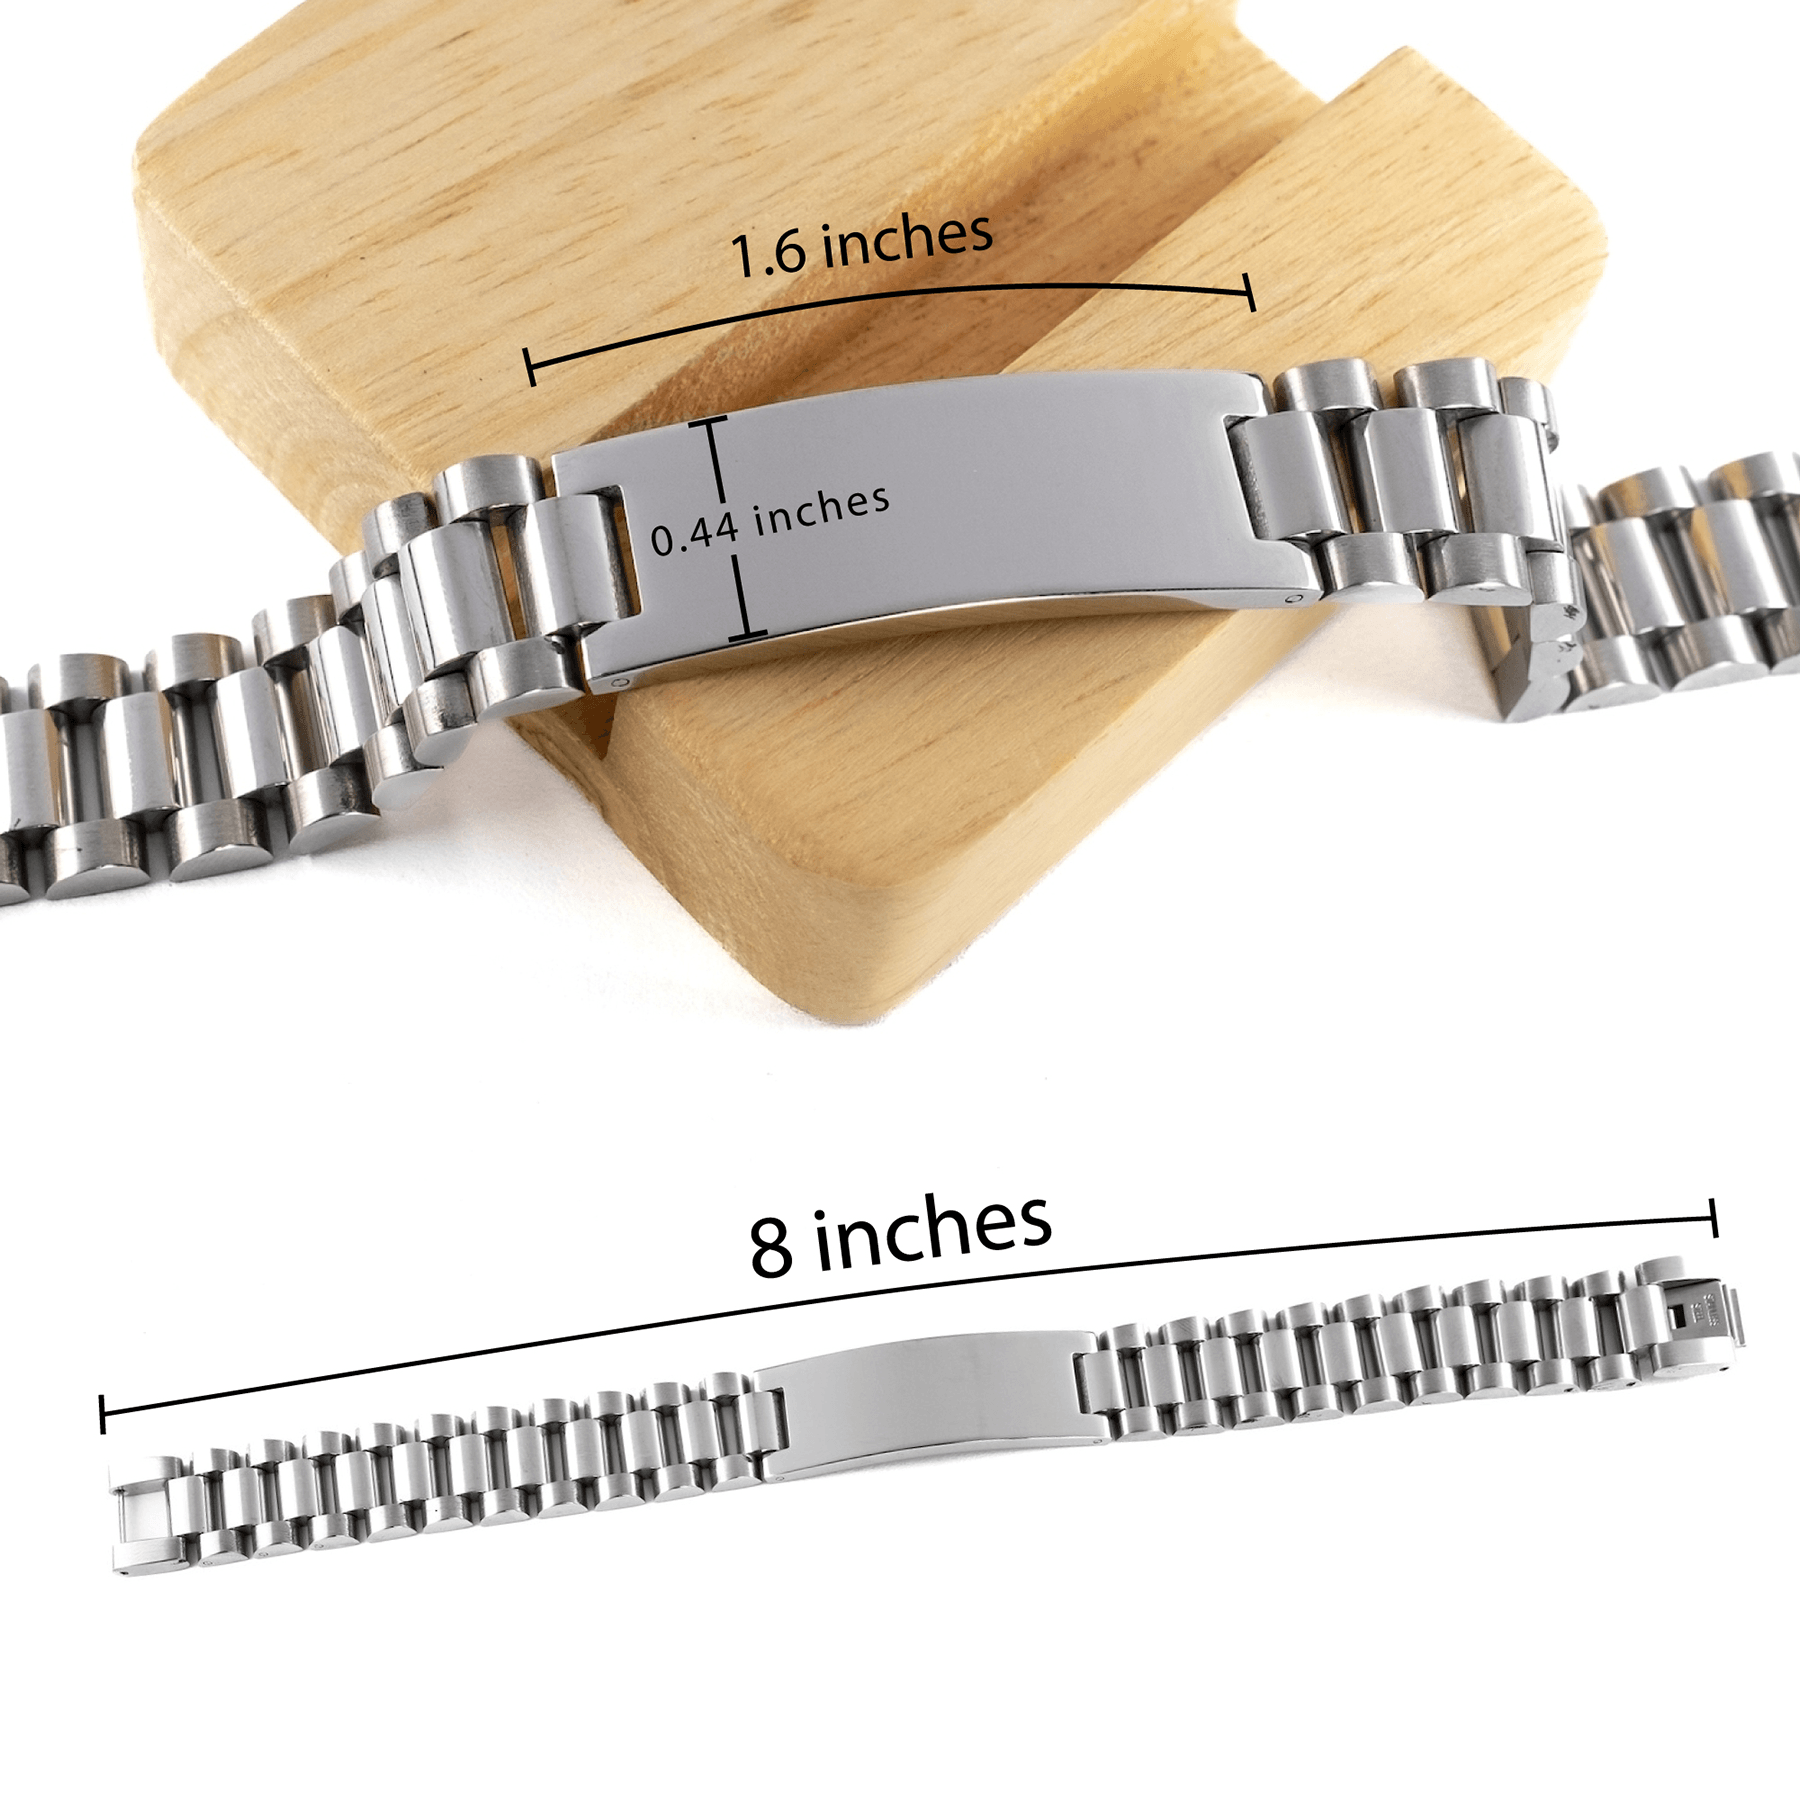 Occupational Therapist Ladder Stainless Steel Engraved Bracelet - Thanks for being who you are - Birthday Christmas Jewelry Gifts Coworkers Colleague Boss - Mallard Moon Gift Shop